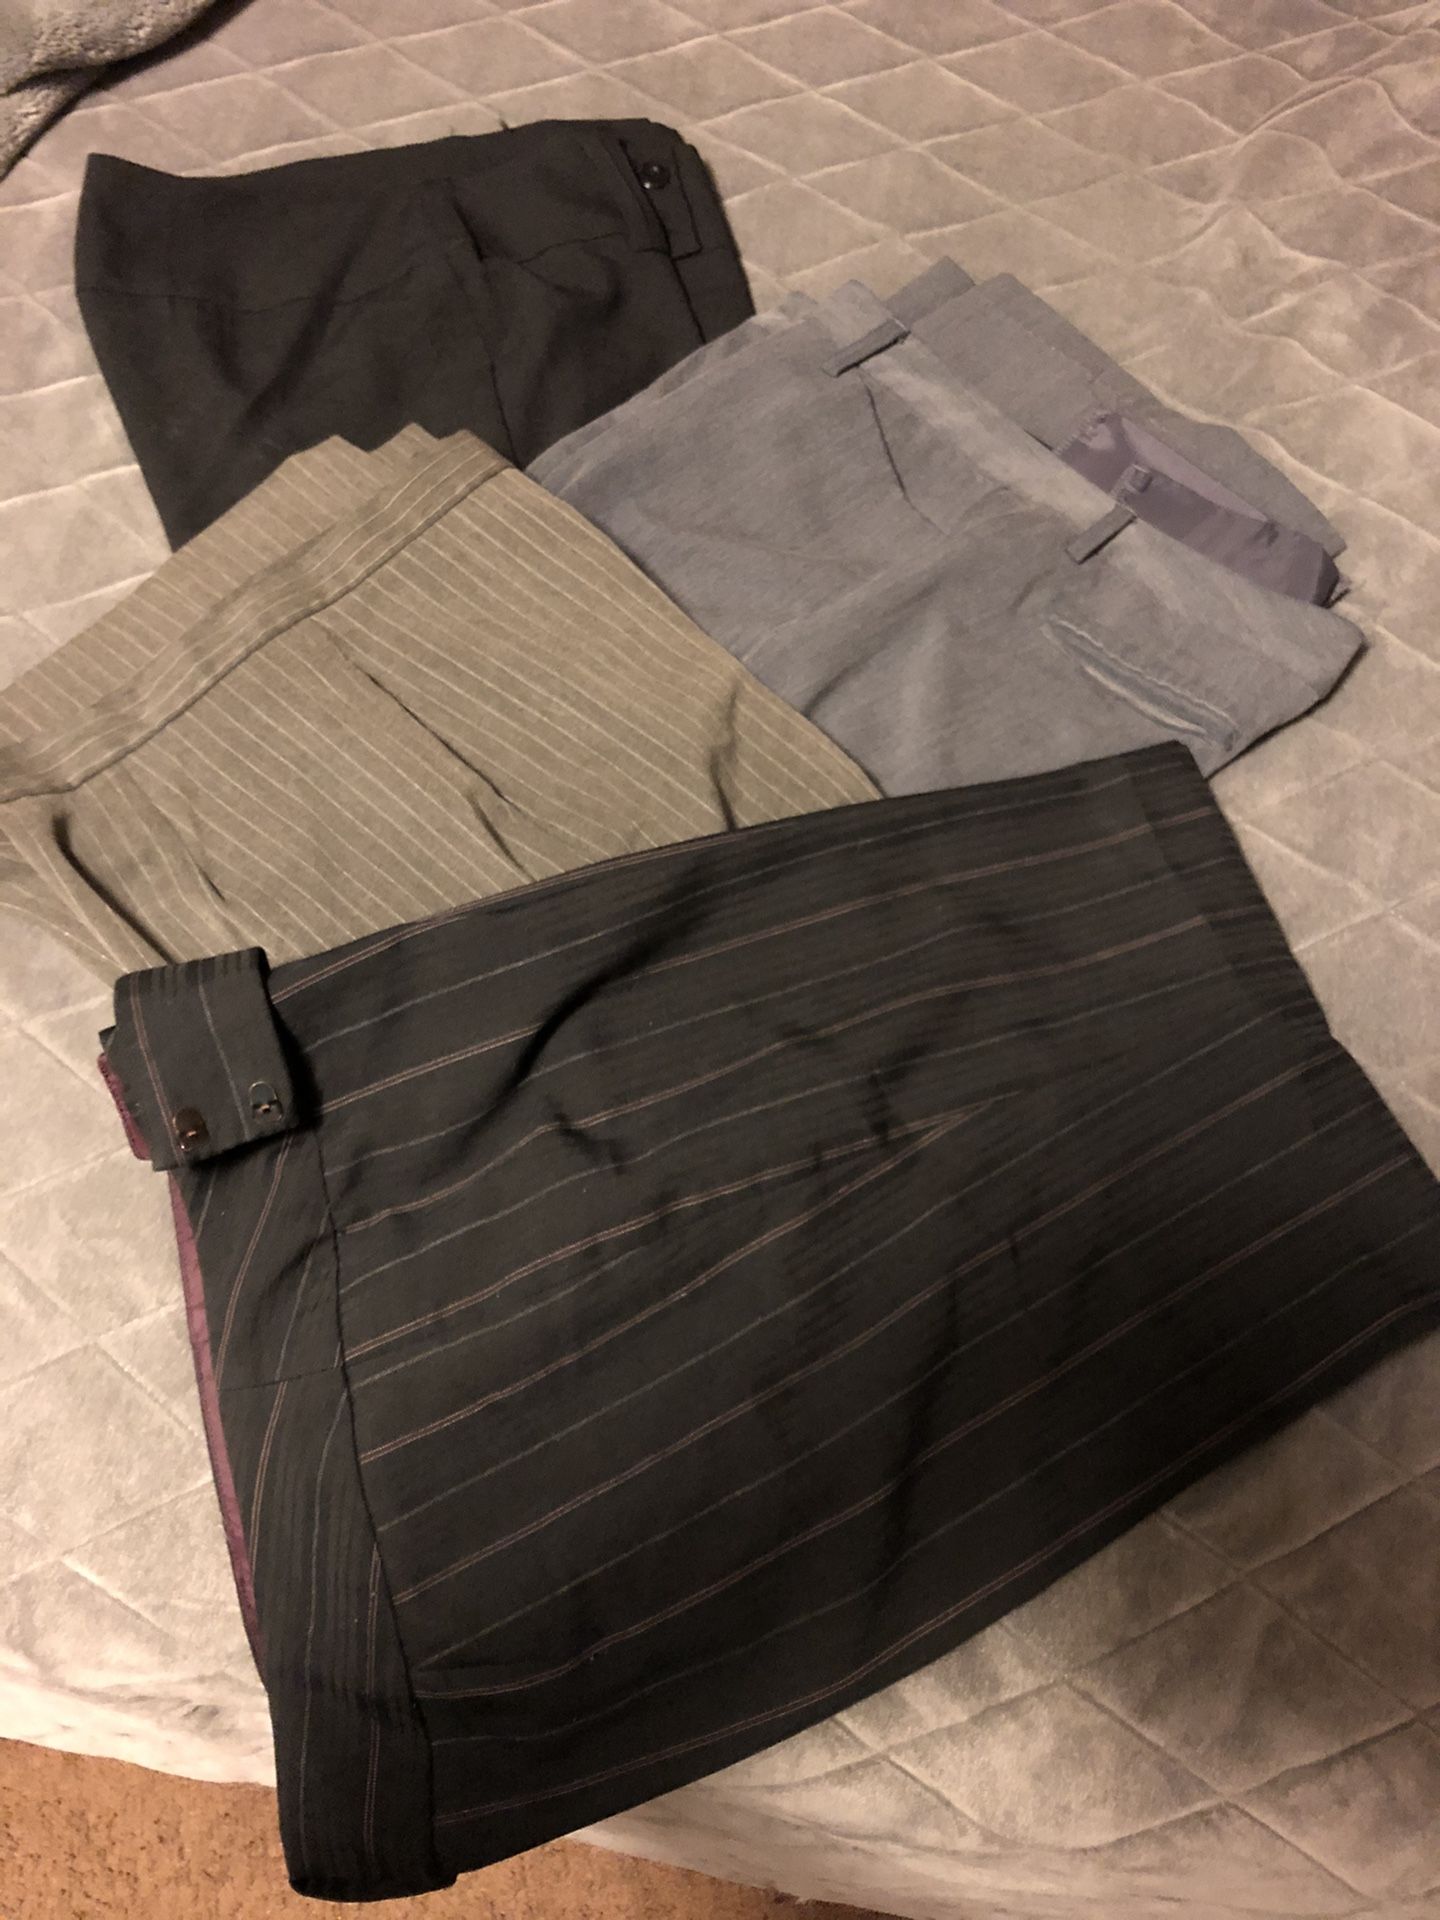 4 PANTS FOR WOMEN . SIZE 9 / 10